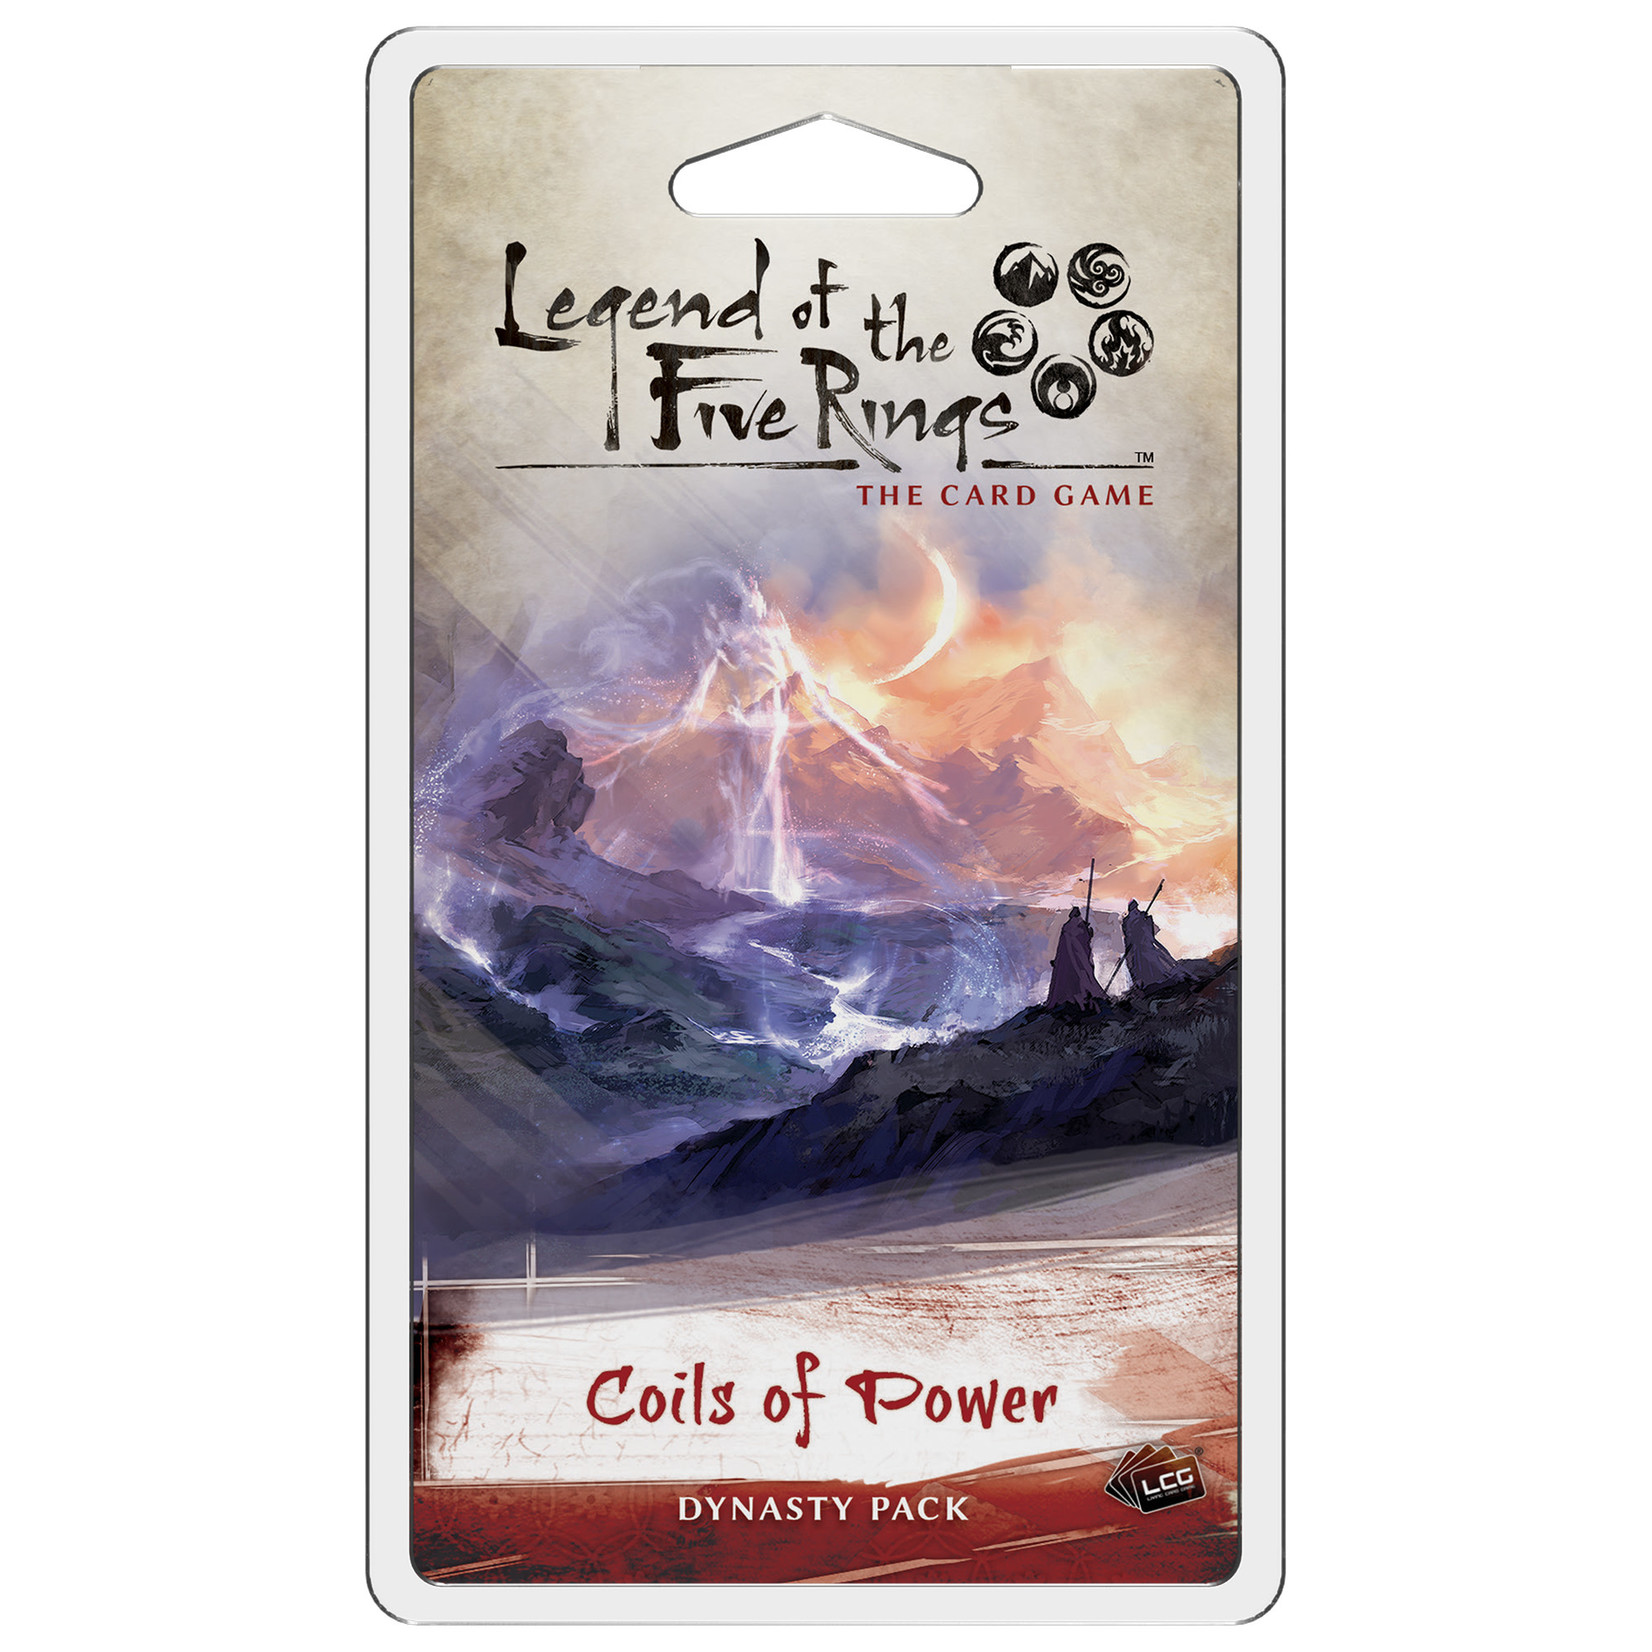 Fantasy Flight Games Legend of the Five Rings: The Card Game - Coils of Power Dynasty Pack